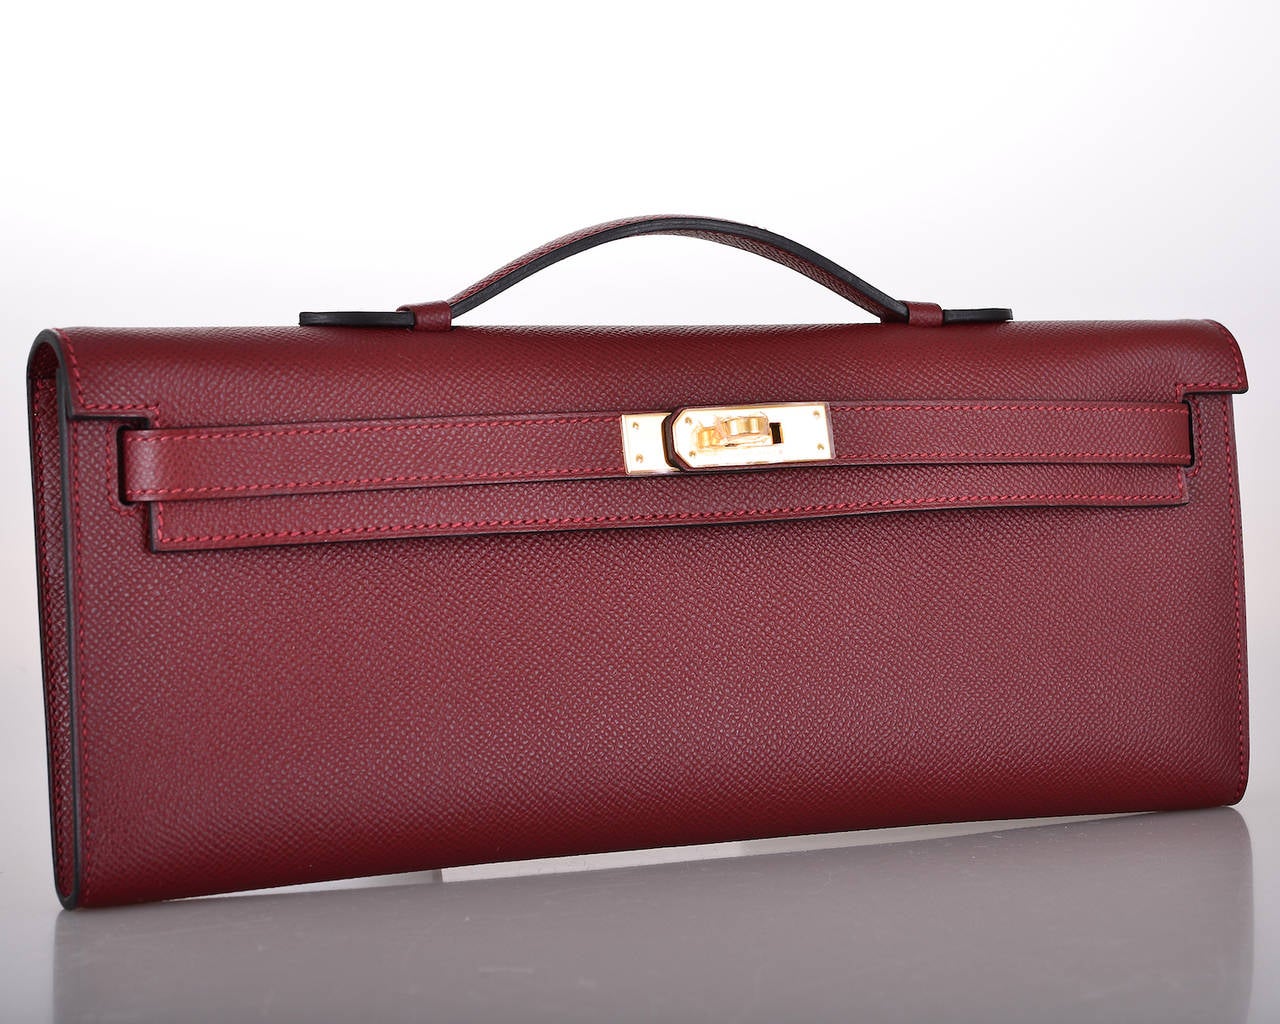 As always, another one of my fab finds! CAN'T GET THIS! Hermes KELLY CUT IN THE MOST SOPHISTICATED ROUGE H RED EPSOM.

THE MOST GORGEOUS RED EVER with GOLD hardware.
MEASURES:
12 1/4 x 5